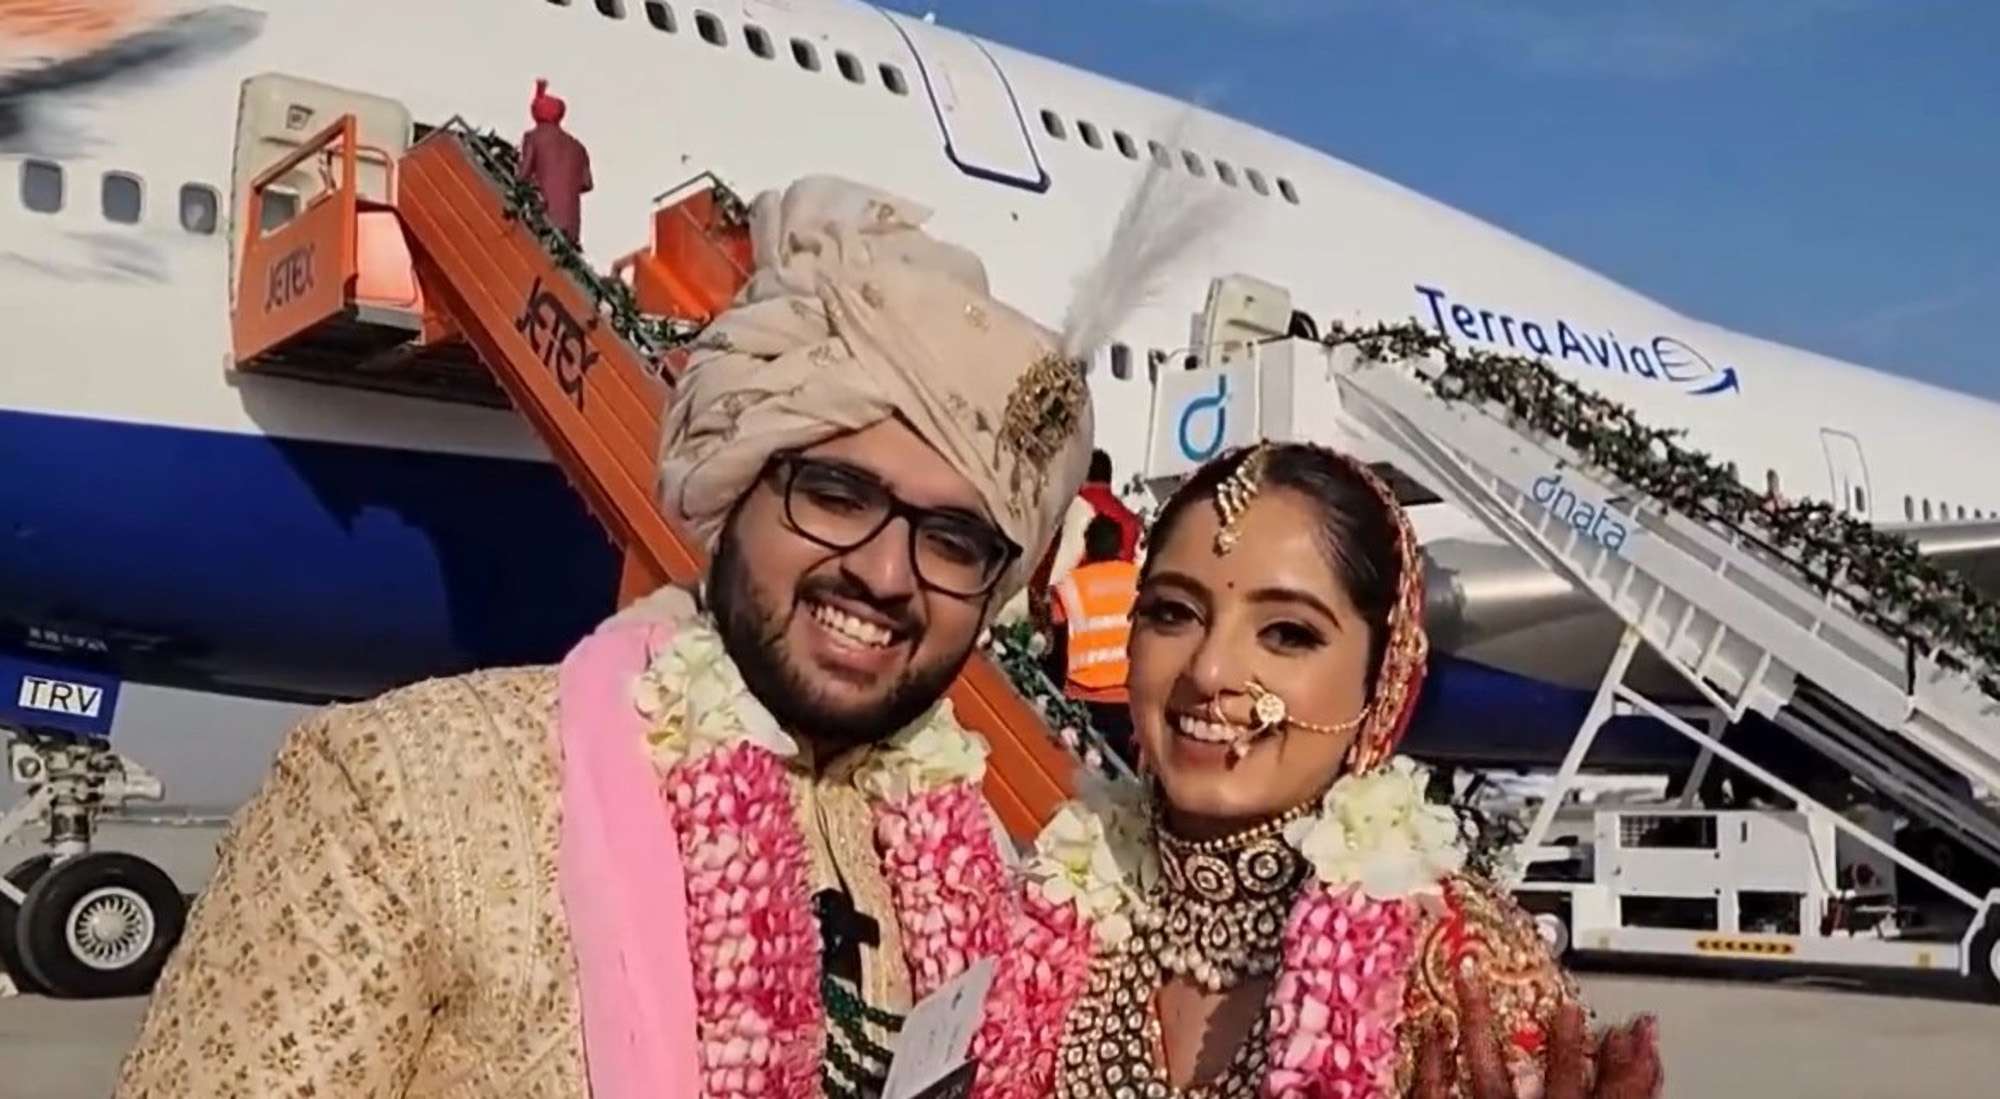 UAE-Based Indian Businessman Dilip Popley Hosts Daughter’s Wedding On Private Jet In Dubai’s Skies